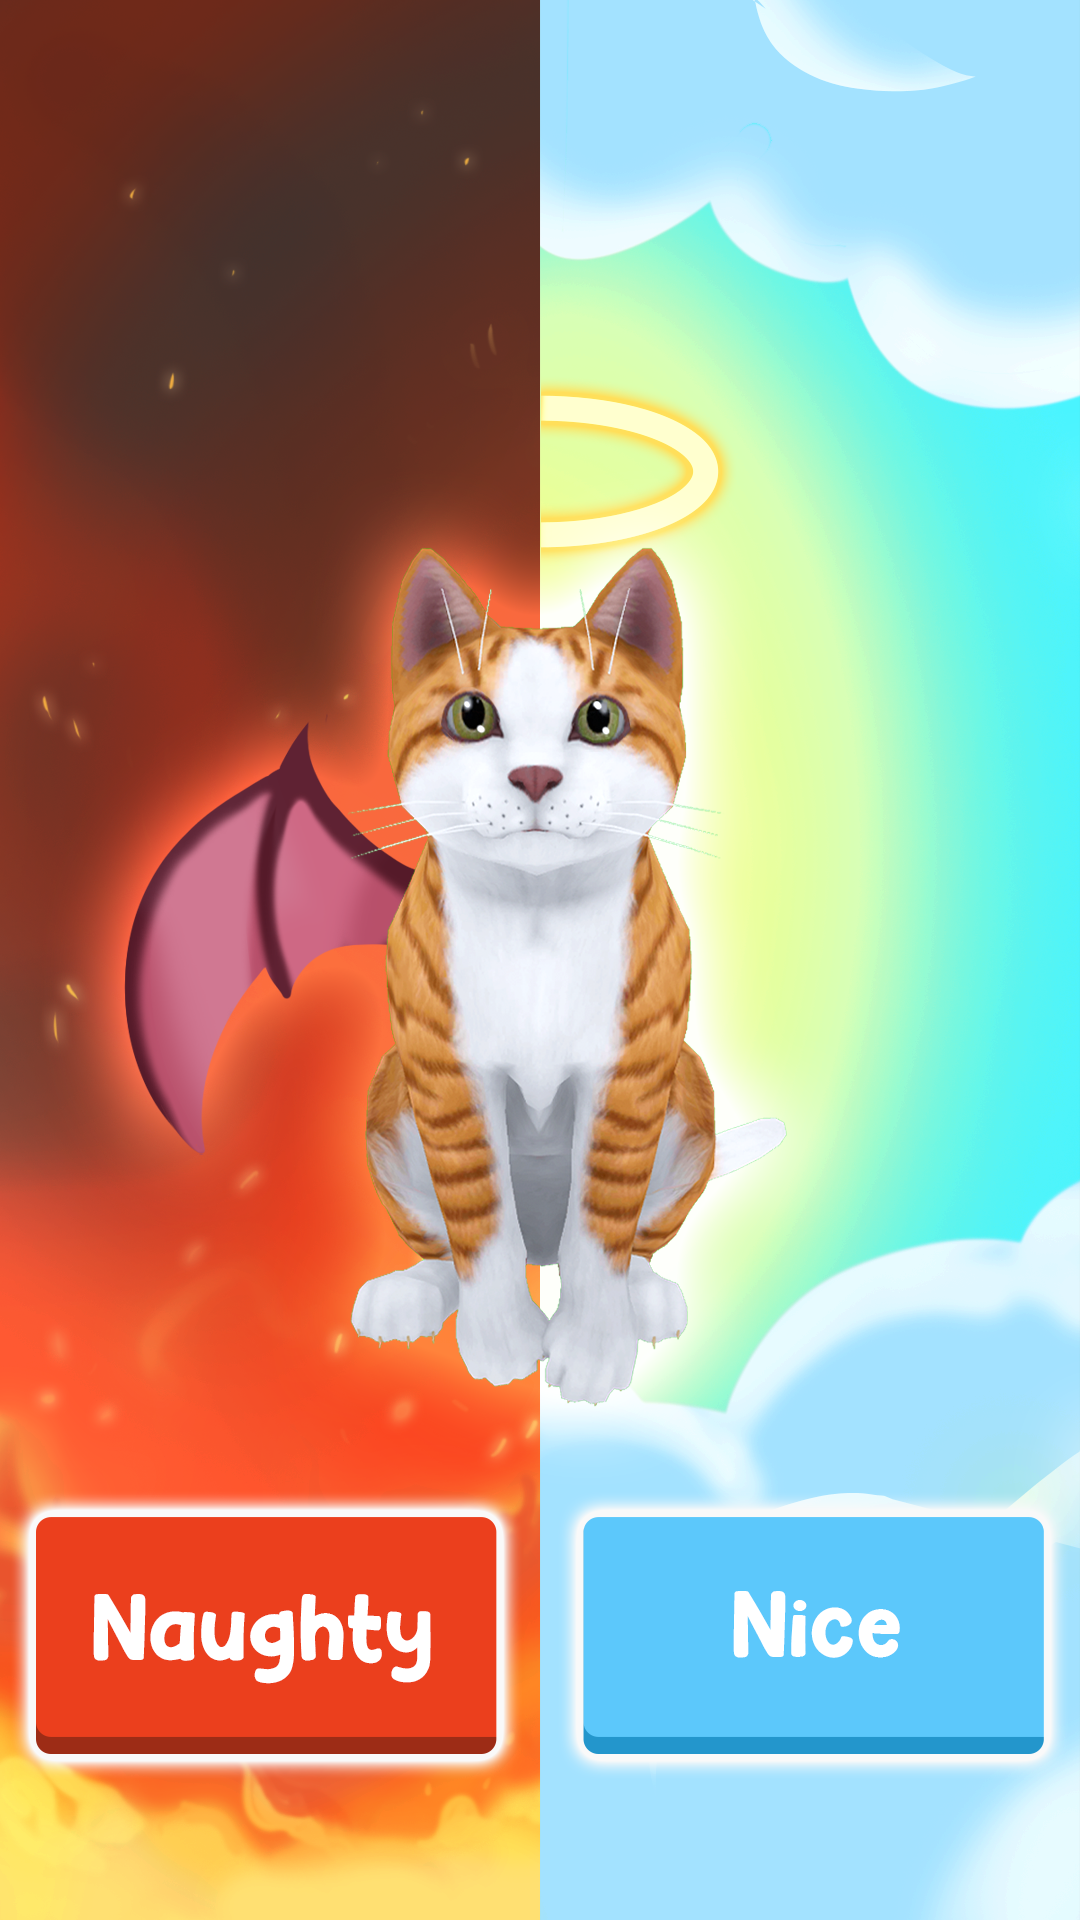 Warrior Cats Game [IN PROGRESS] - Play online at